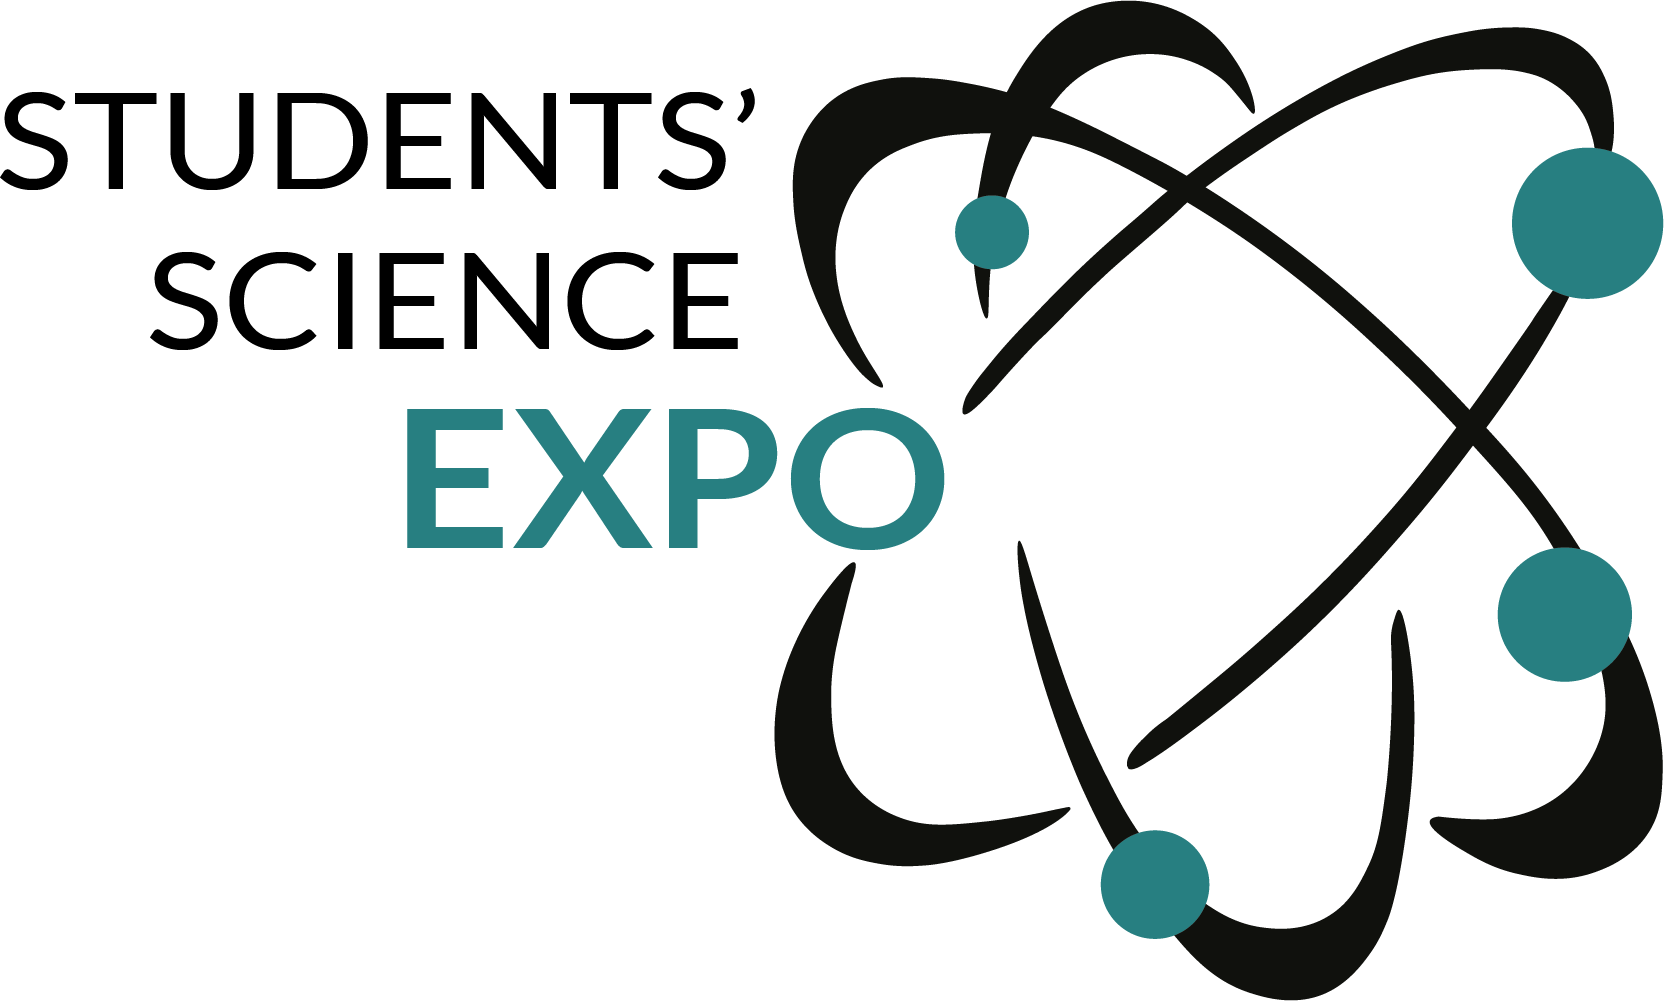 Students' Science Expo